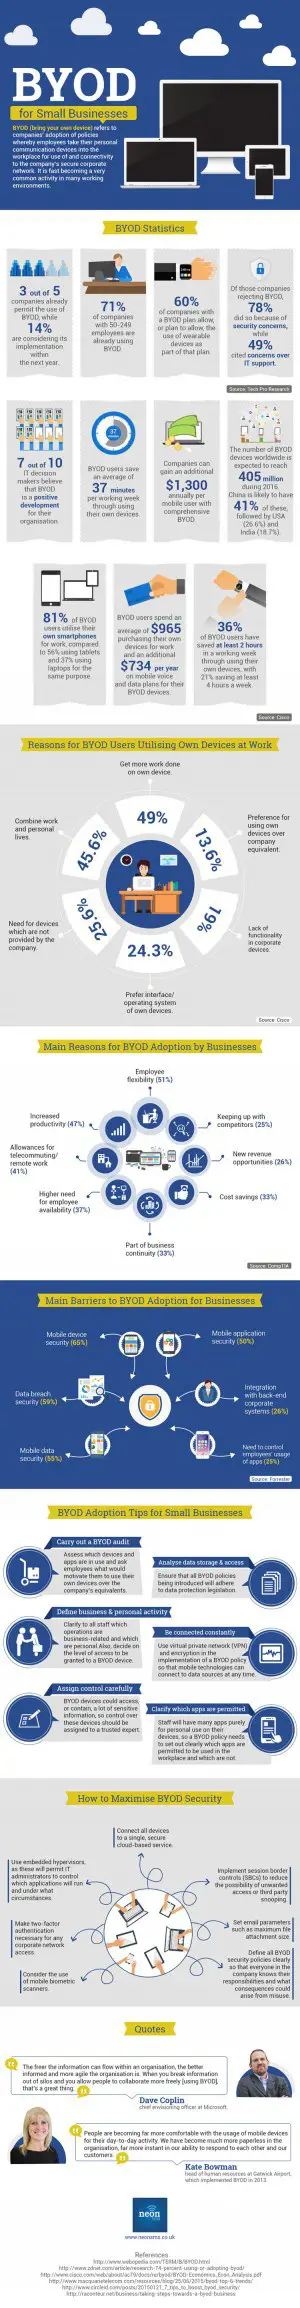 BYOD-for-Small-Businesses-Infographic